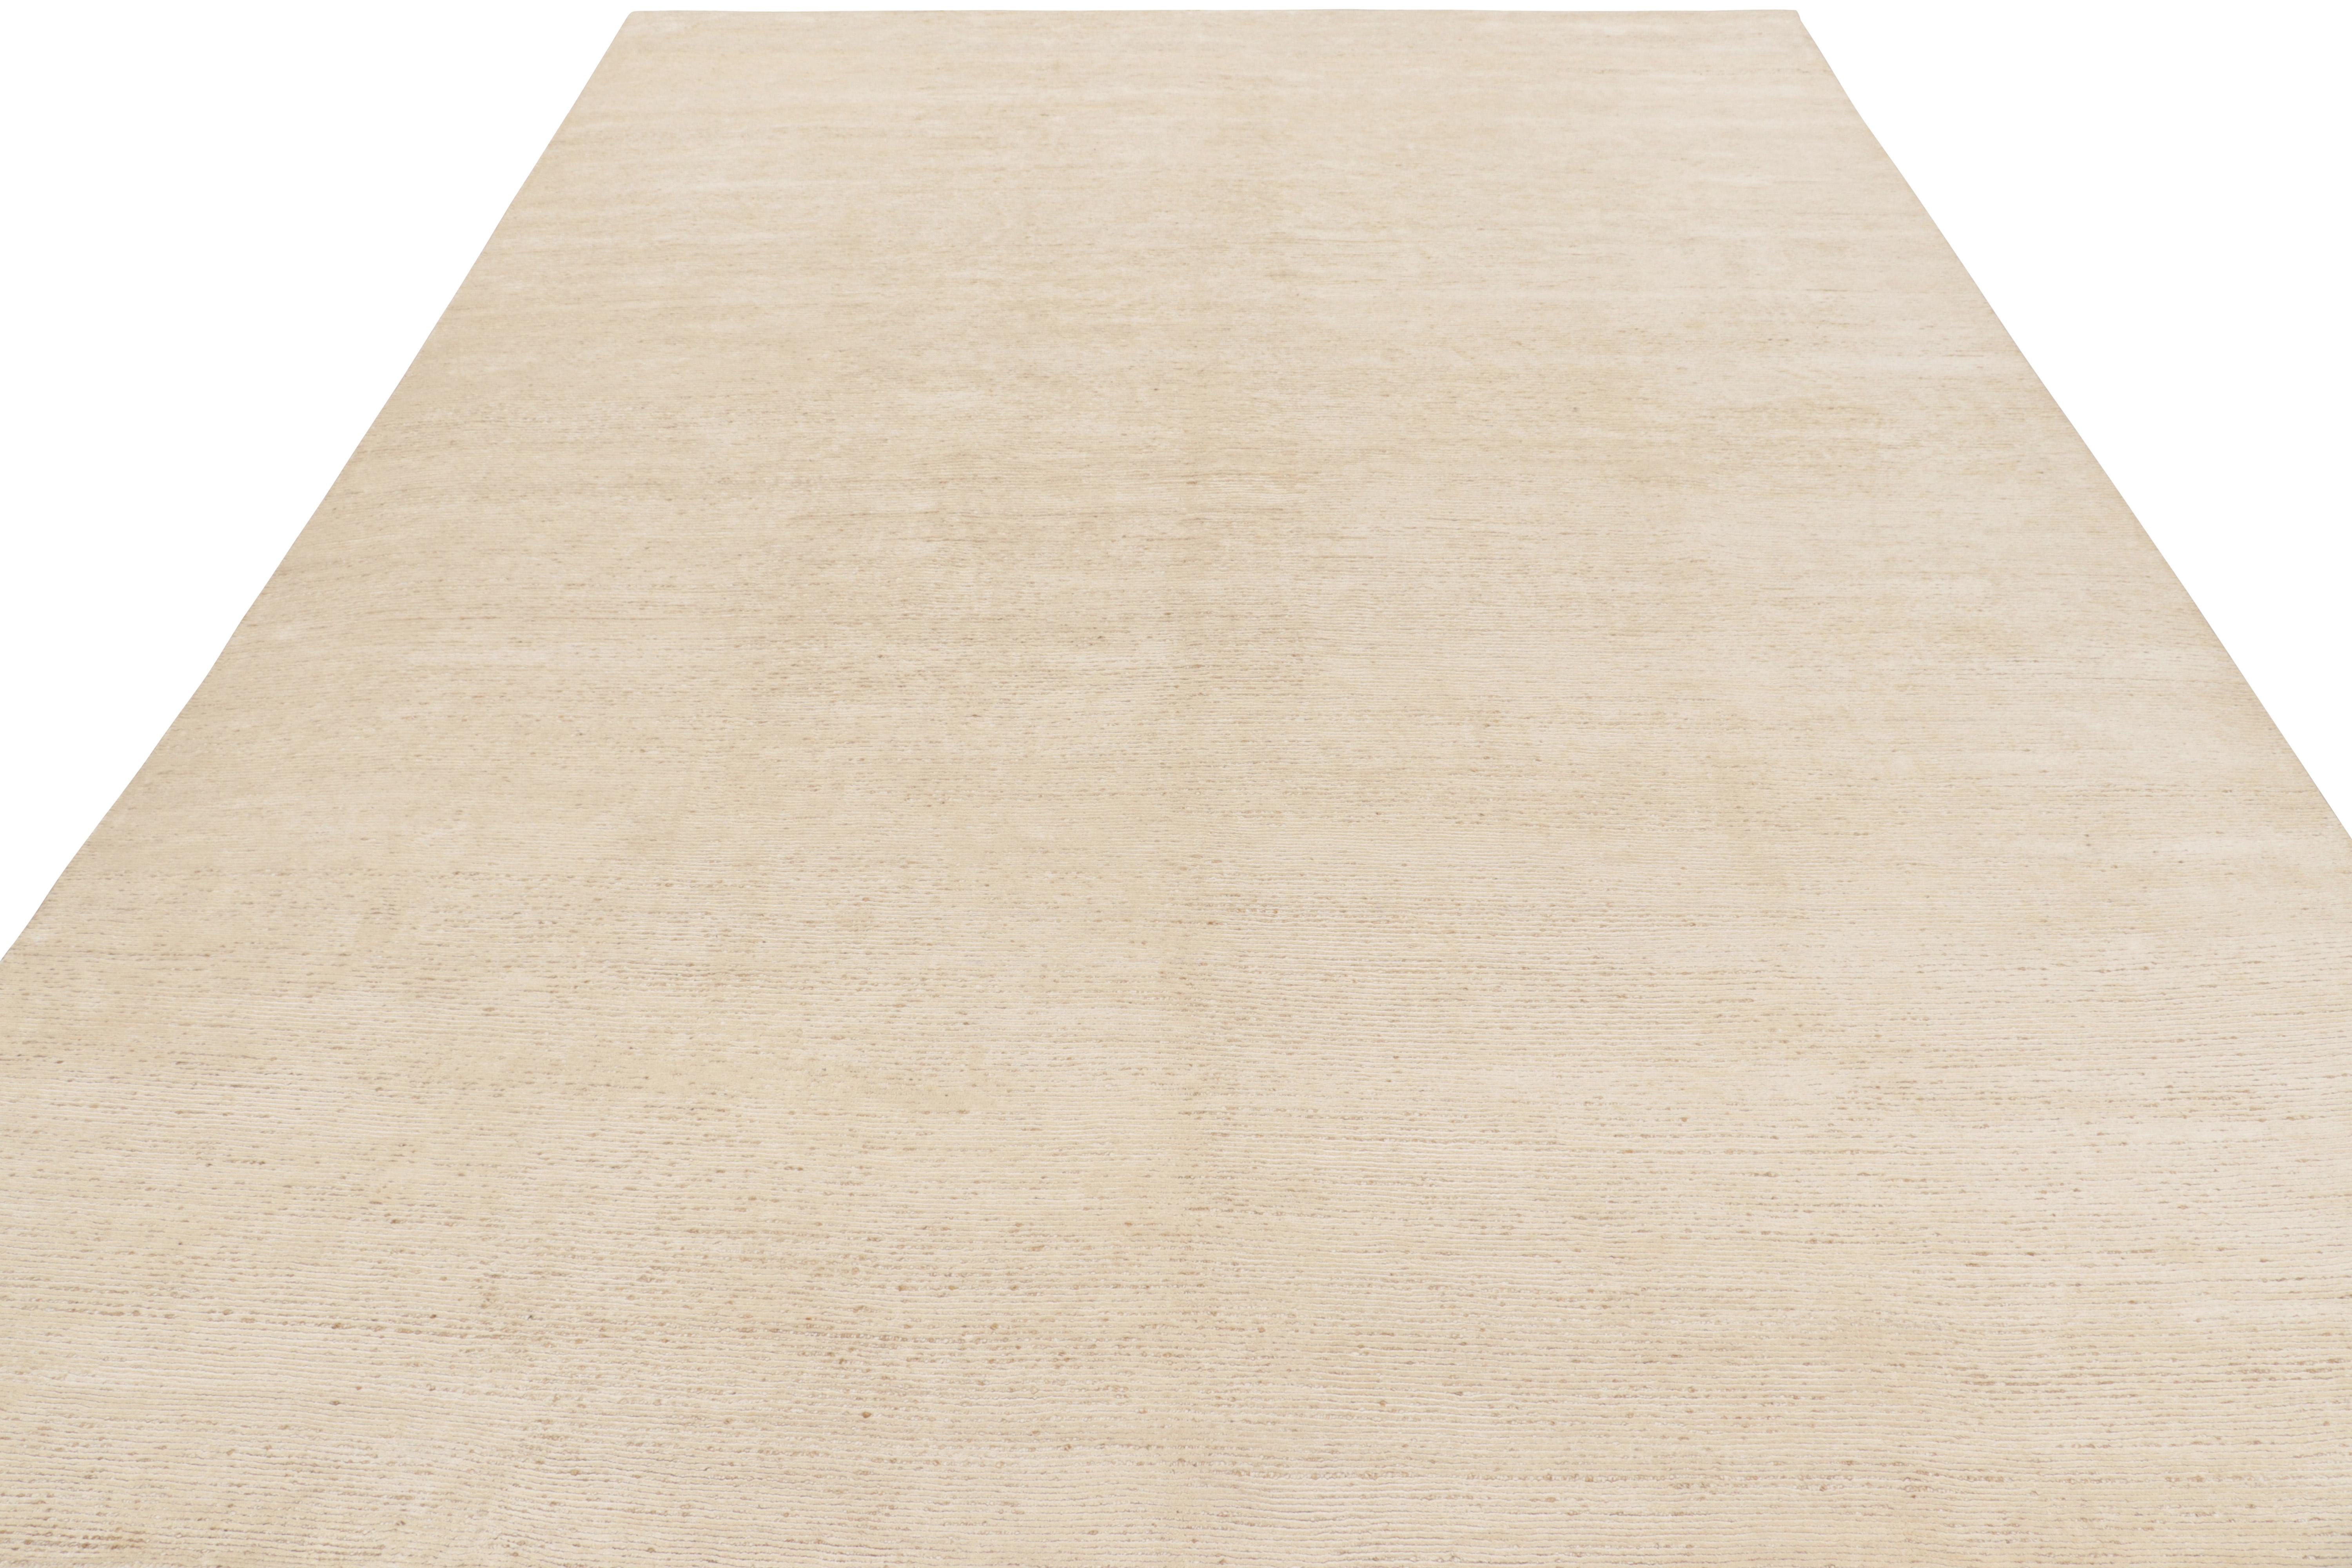 Indian Rug & Kilim’s Contemporary Textural Rug in Beige, Cream and White Tones For Sale